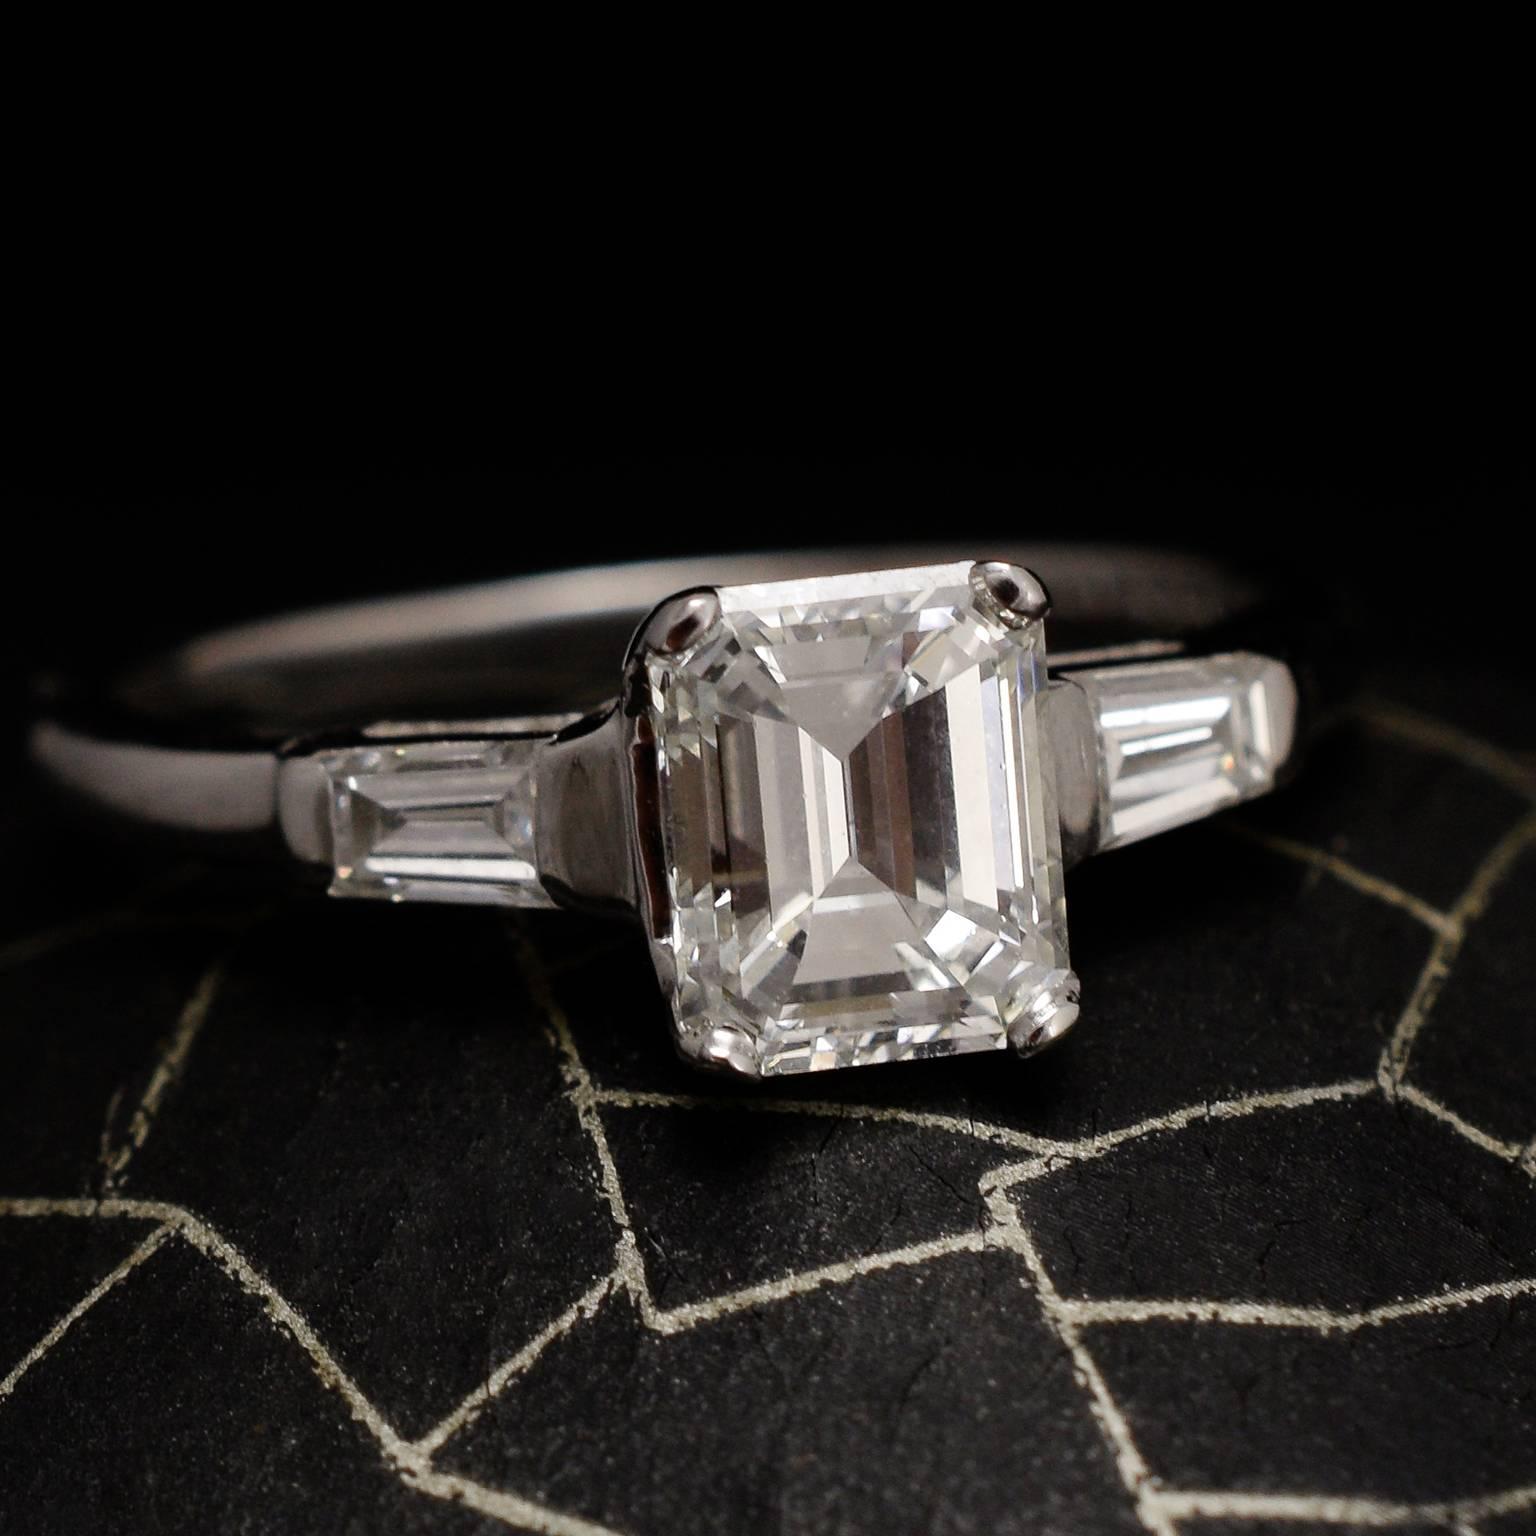 Vintage 1.14 Carat Emerald Cut Diamond Engagement Ring In Good Condition For Sale In Brooklyn, NY